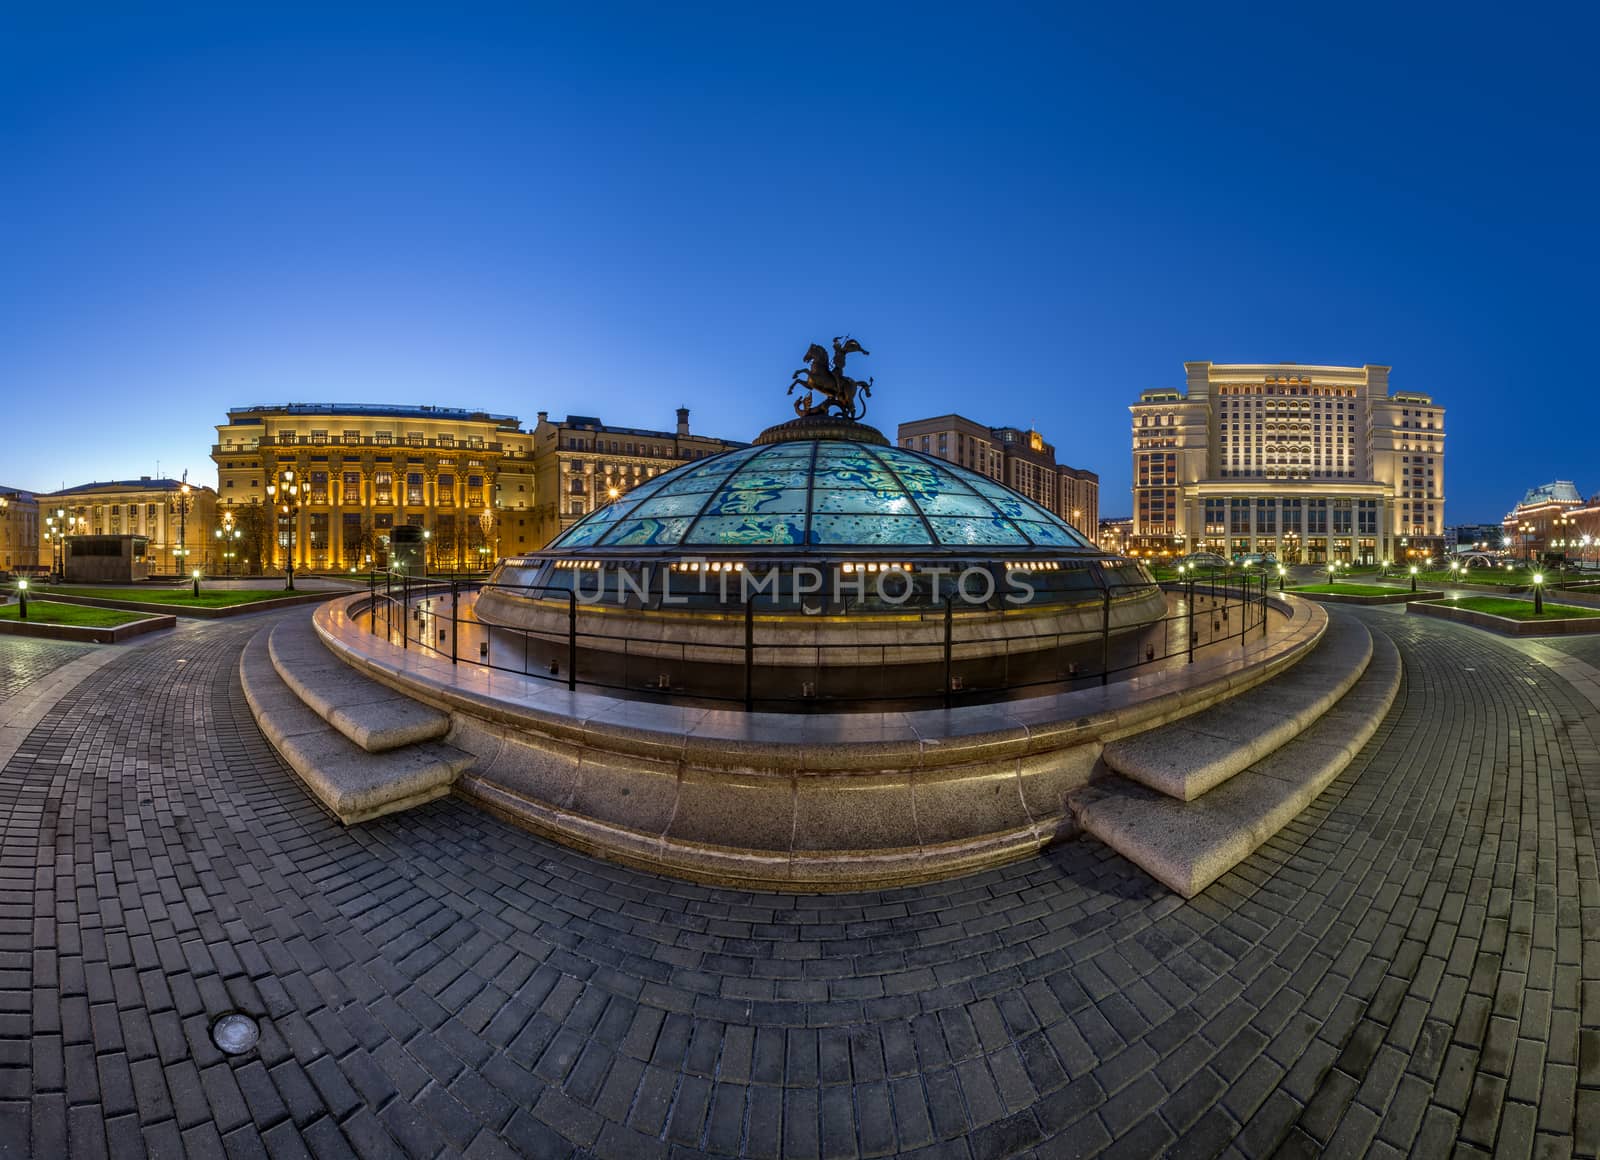 Panorama of Manege Square in the Evening, Moscow, Russia